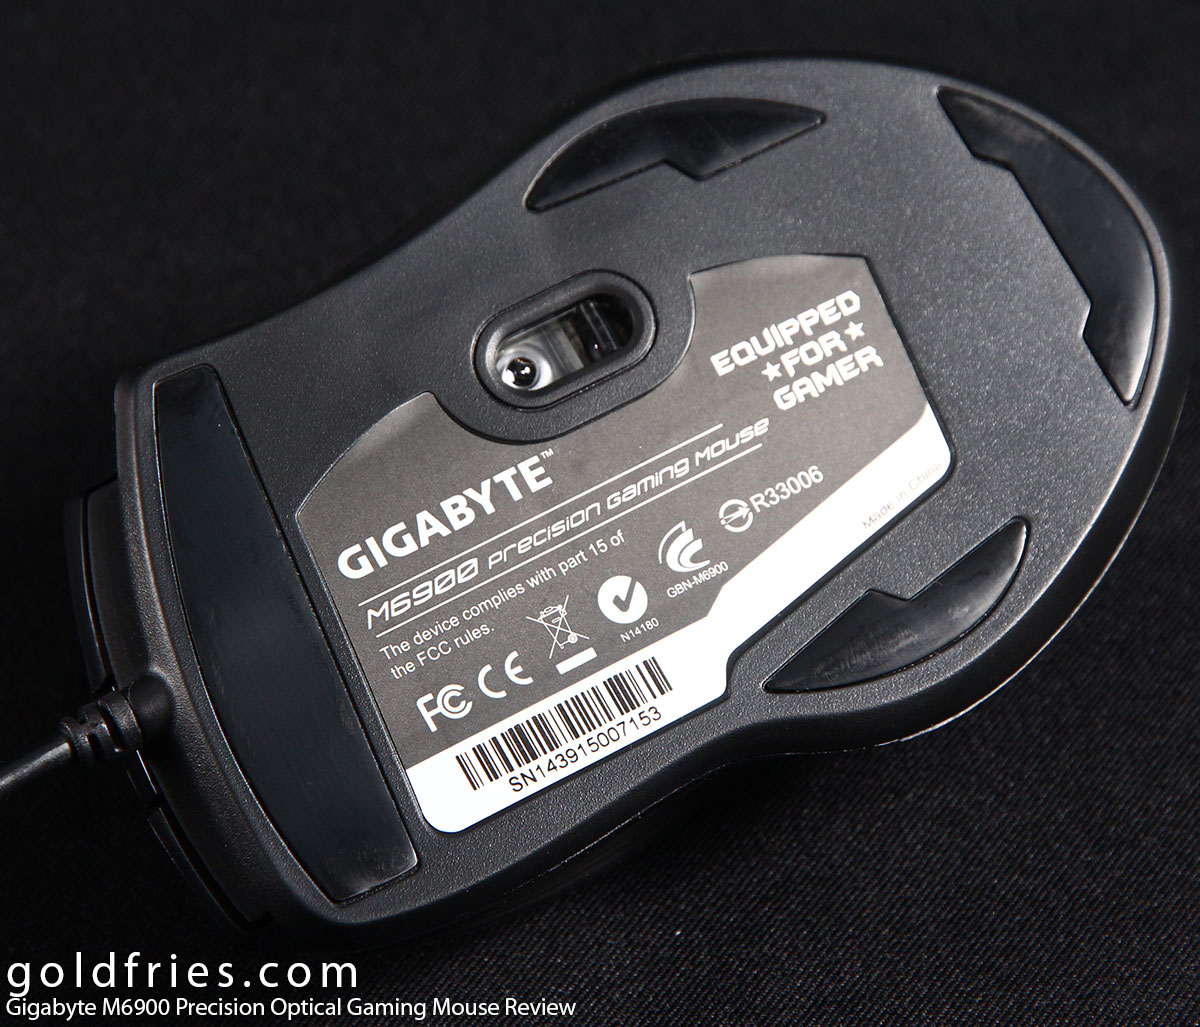 Gigabyte M6900 Precision Optical Gaming Mouse Review